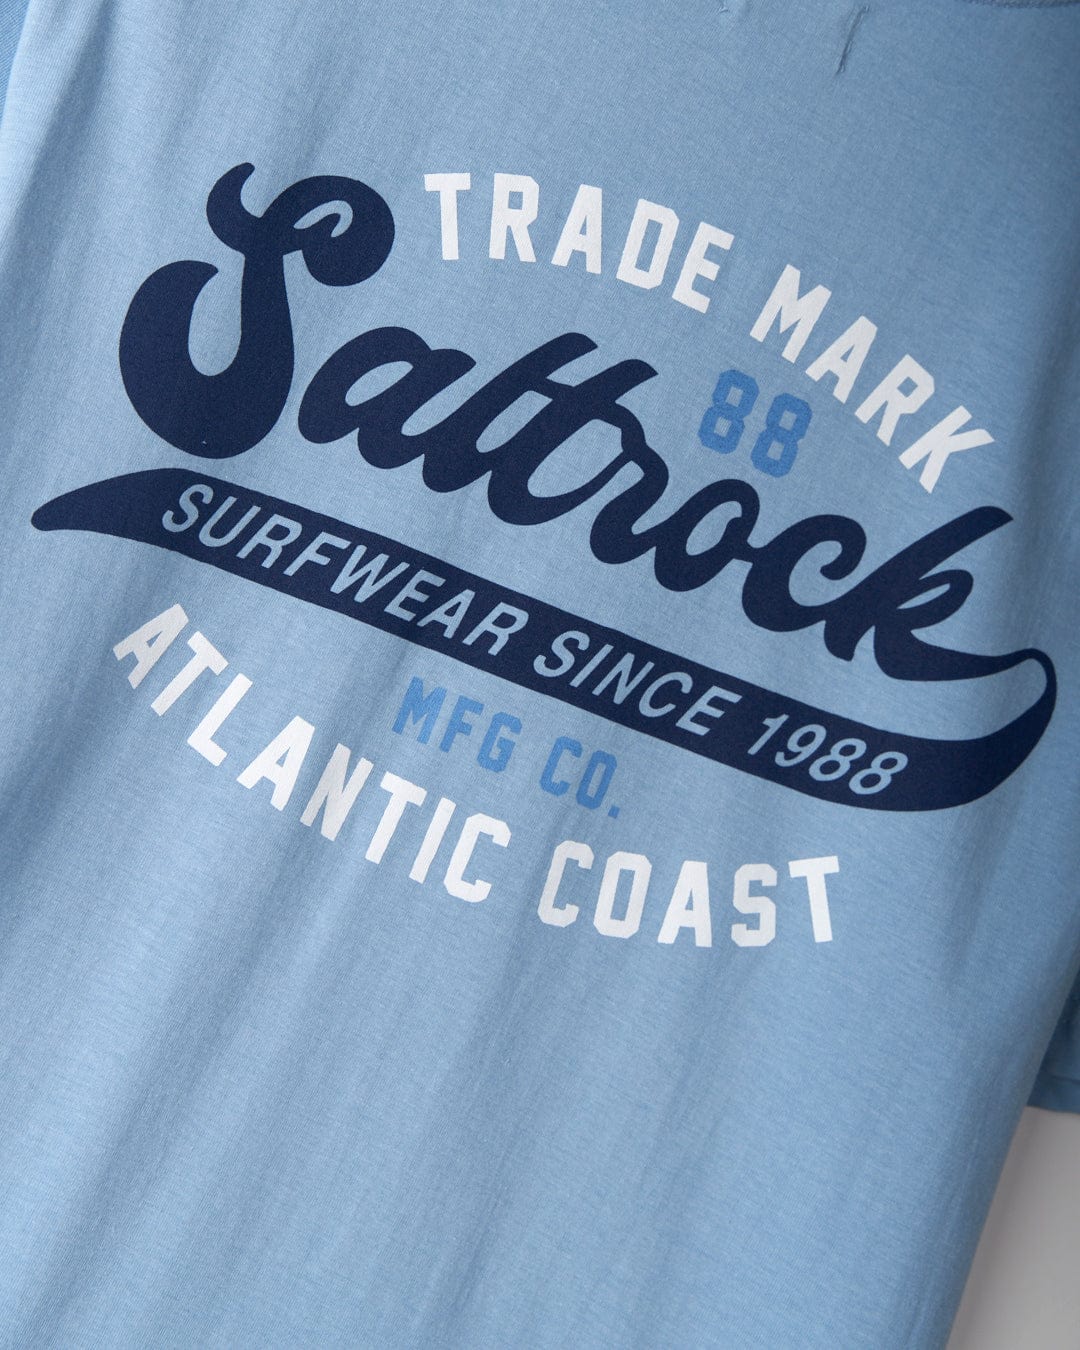 Close-up of a light blue t-shirt with the text "Saltrock Surfwear Since 1988. Trademark MFG Co. Atlantic Coast." written in a curved format, showcasing classic Saltrock branding. This is the Home Run - Mens T-Shirt - Blue from Saltrock.